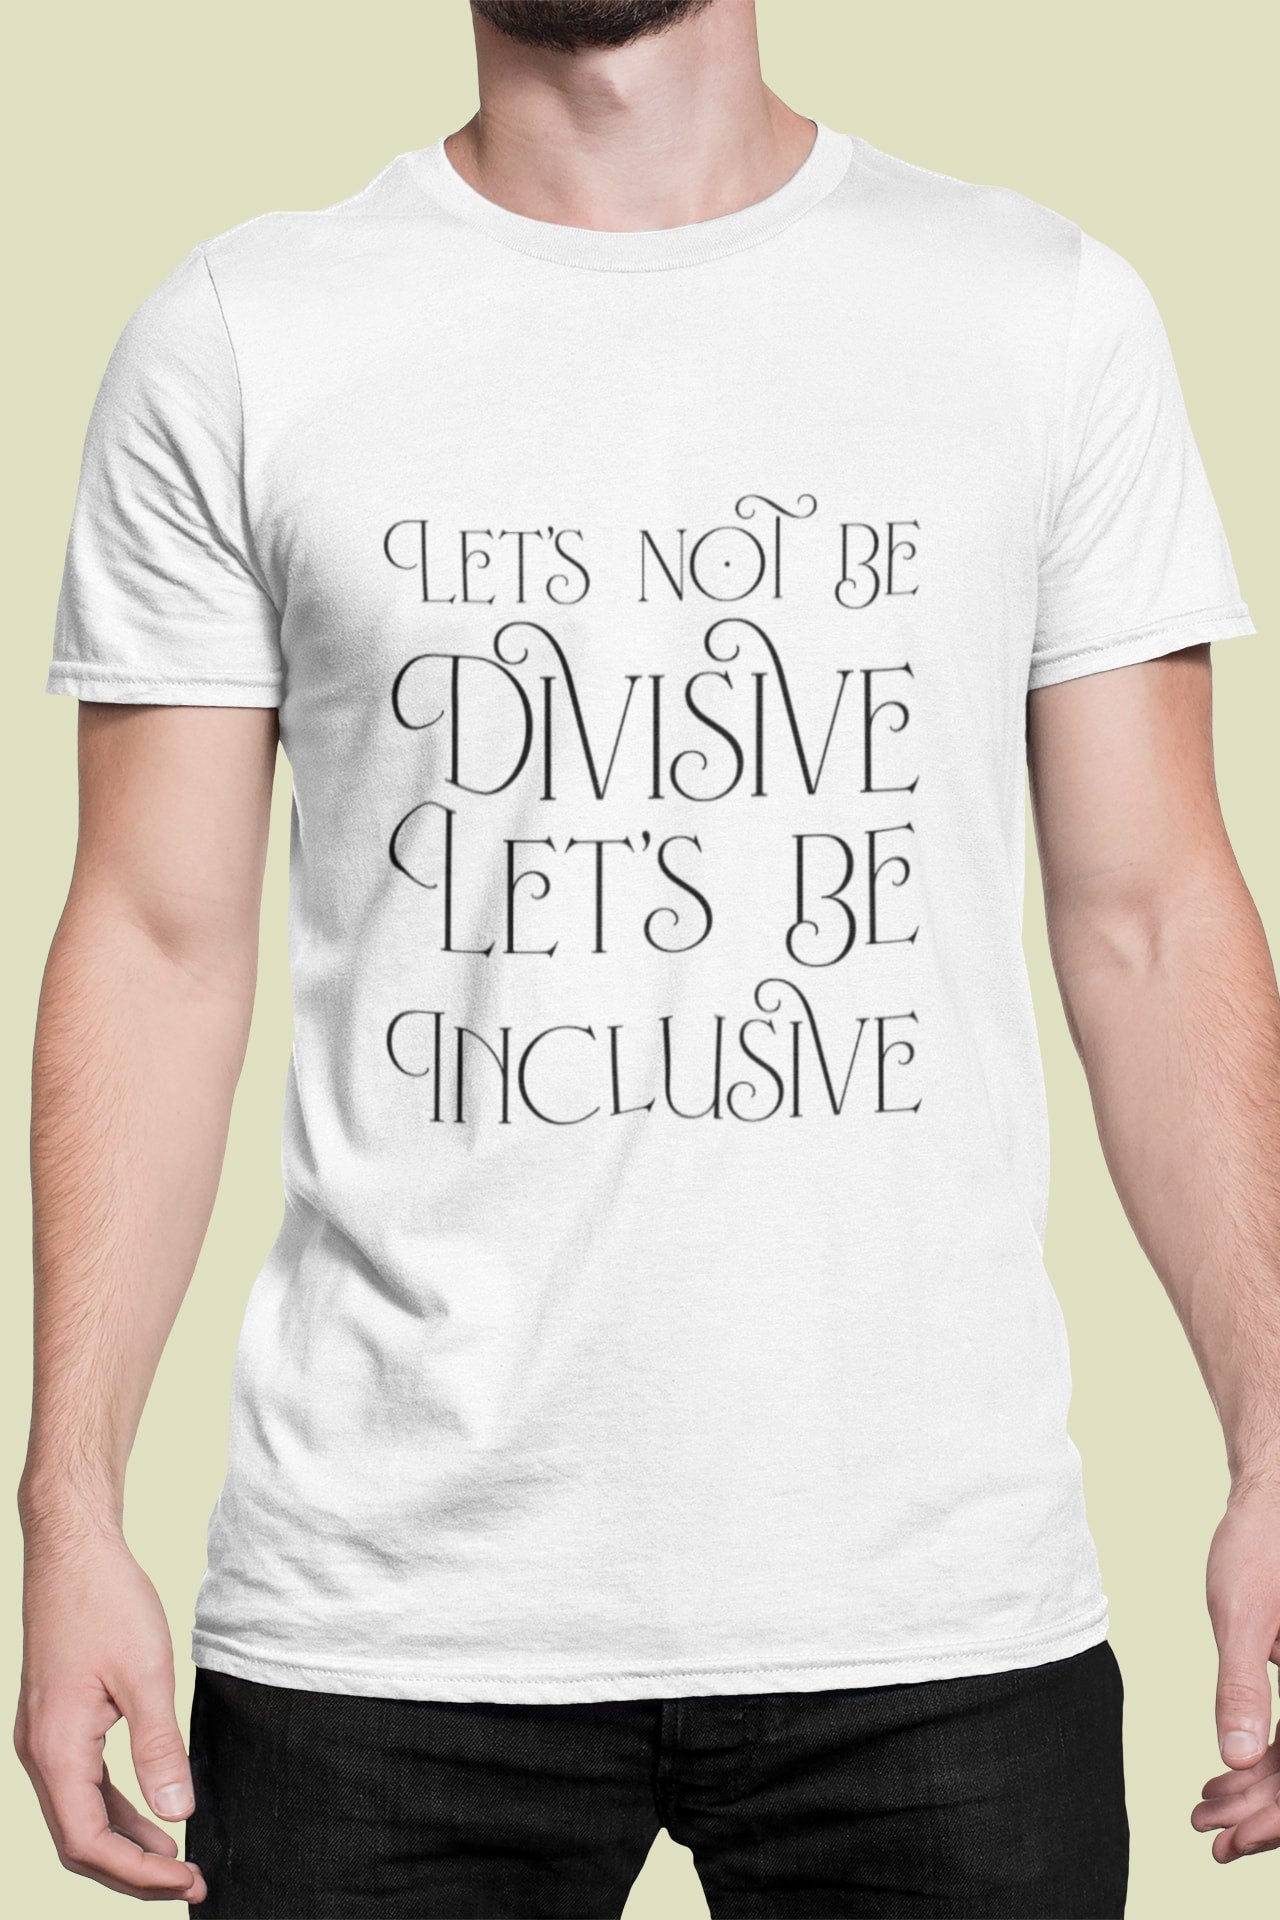 Let’s Not Be Divisive Let’s Be Inclusive Short Sleeve T-Shirt (Men’s) - White / S - Clothing